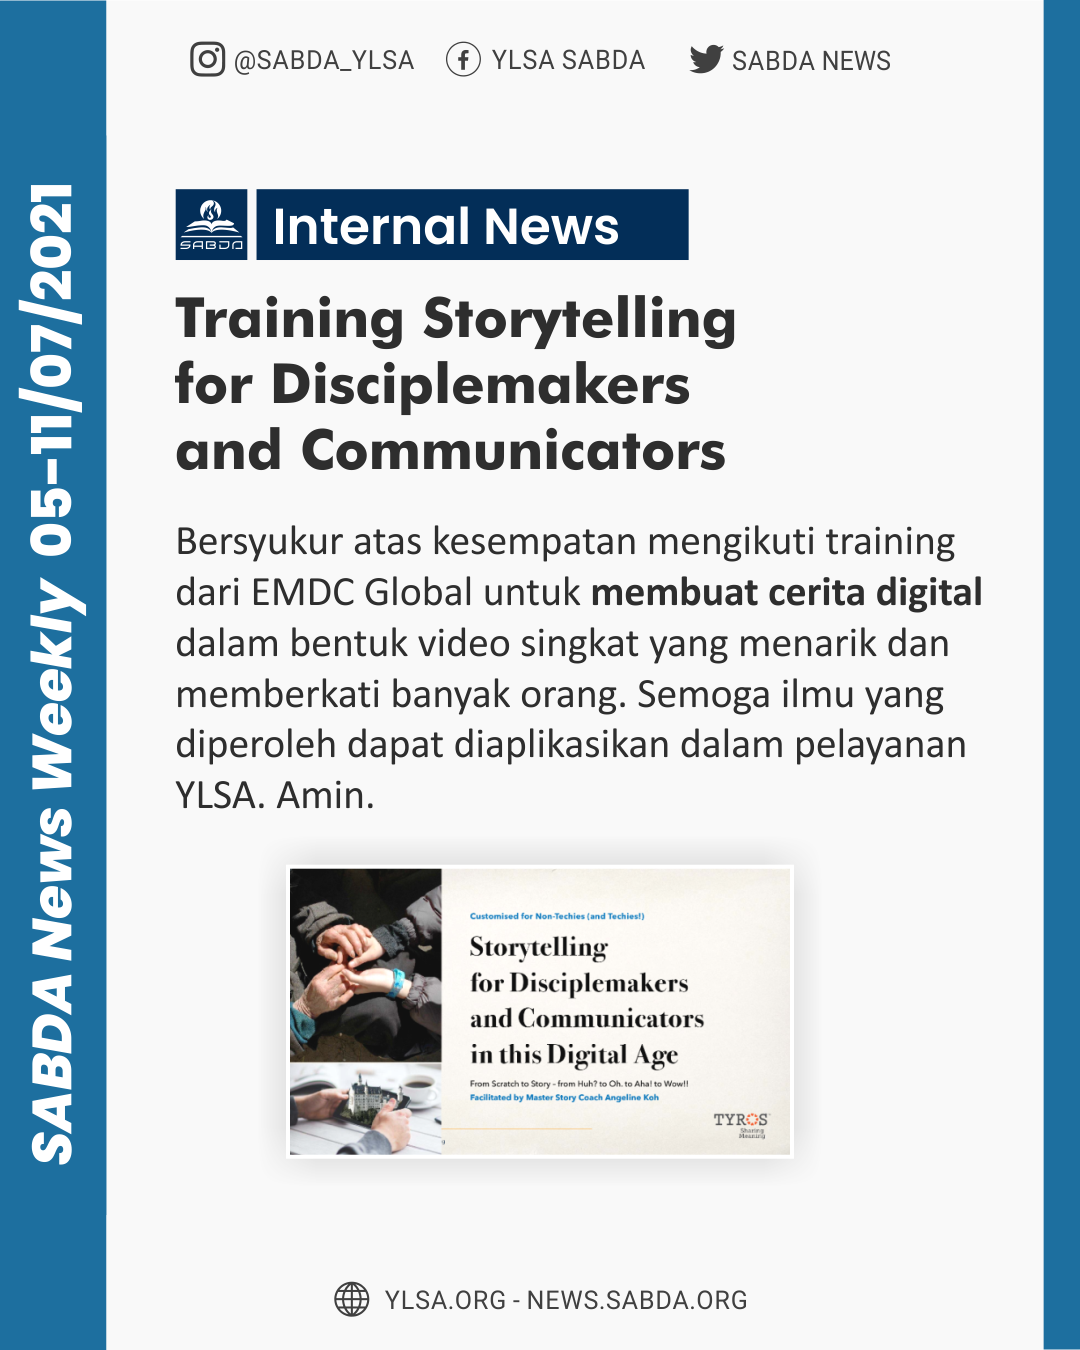 Training Storytelling for Disciplemakers and Communicators